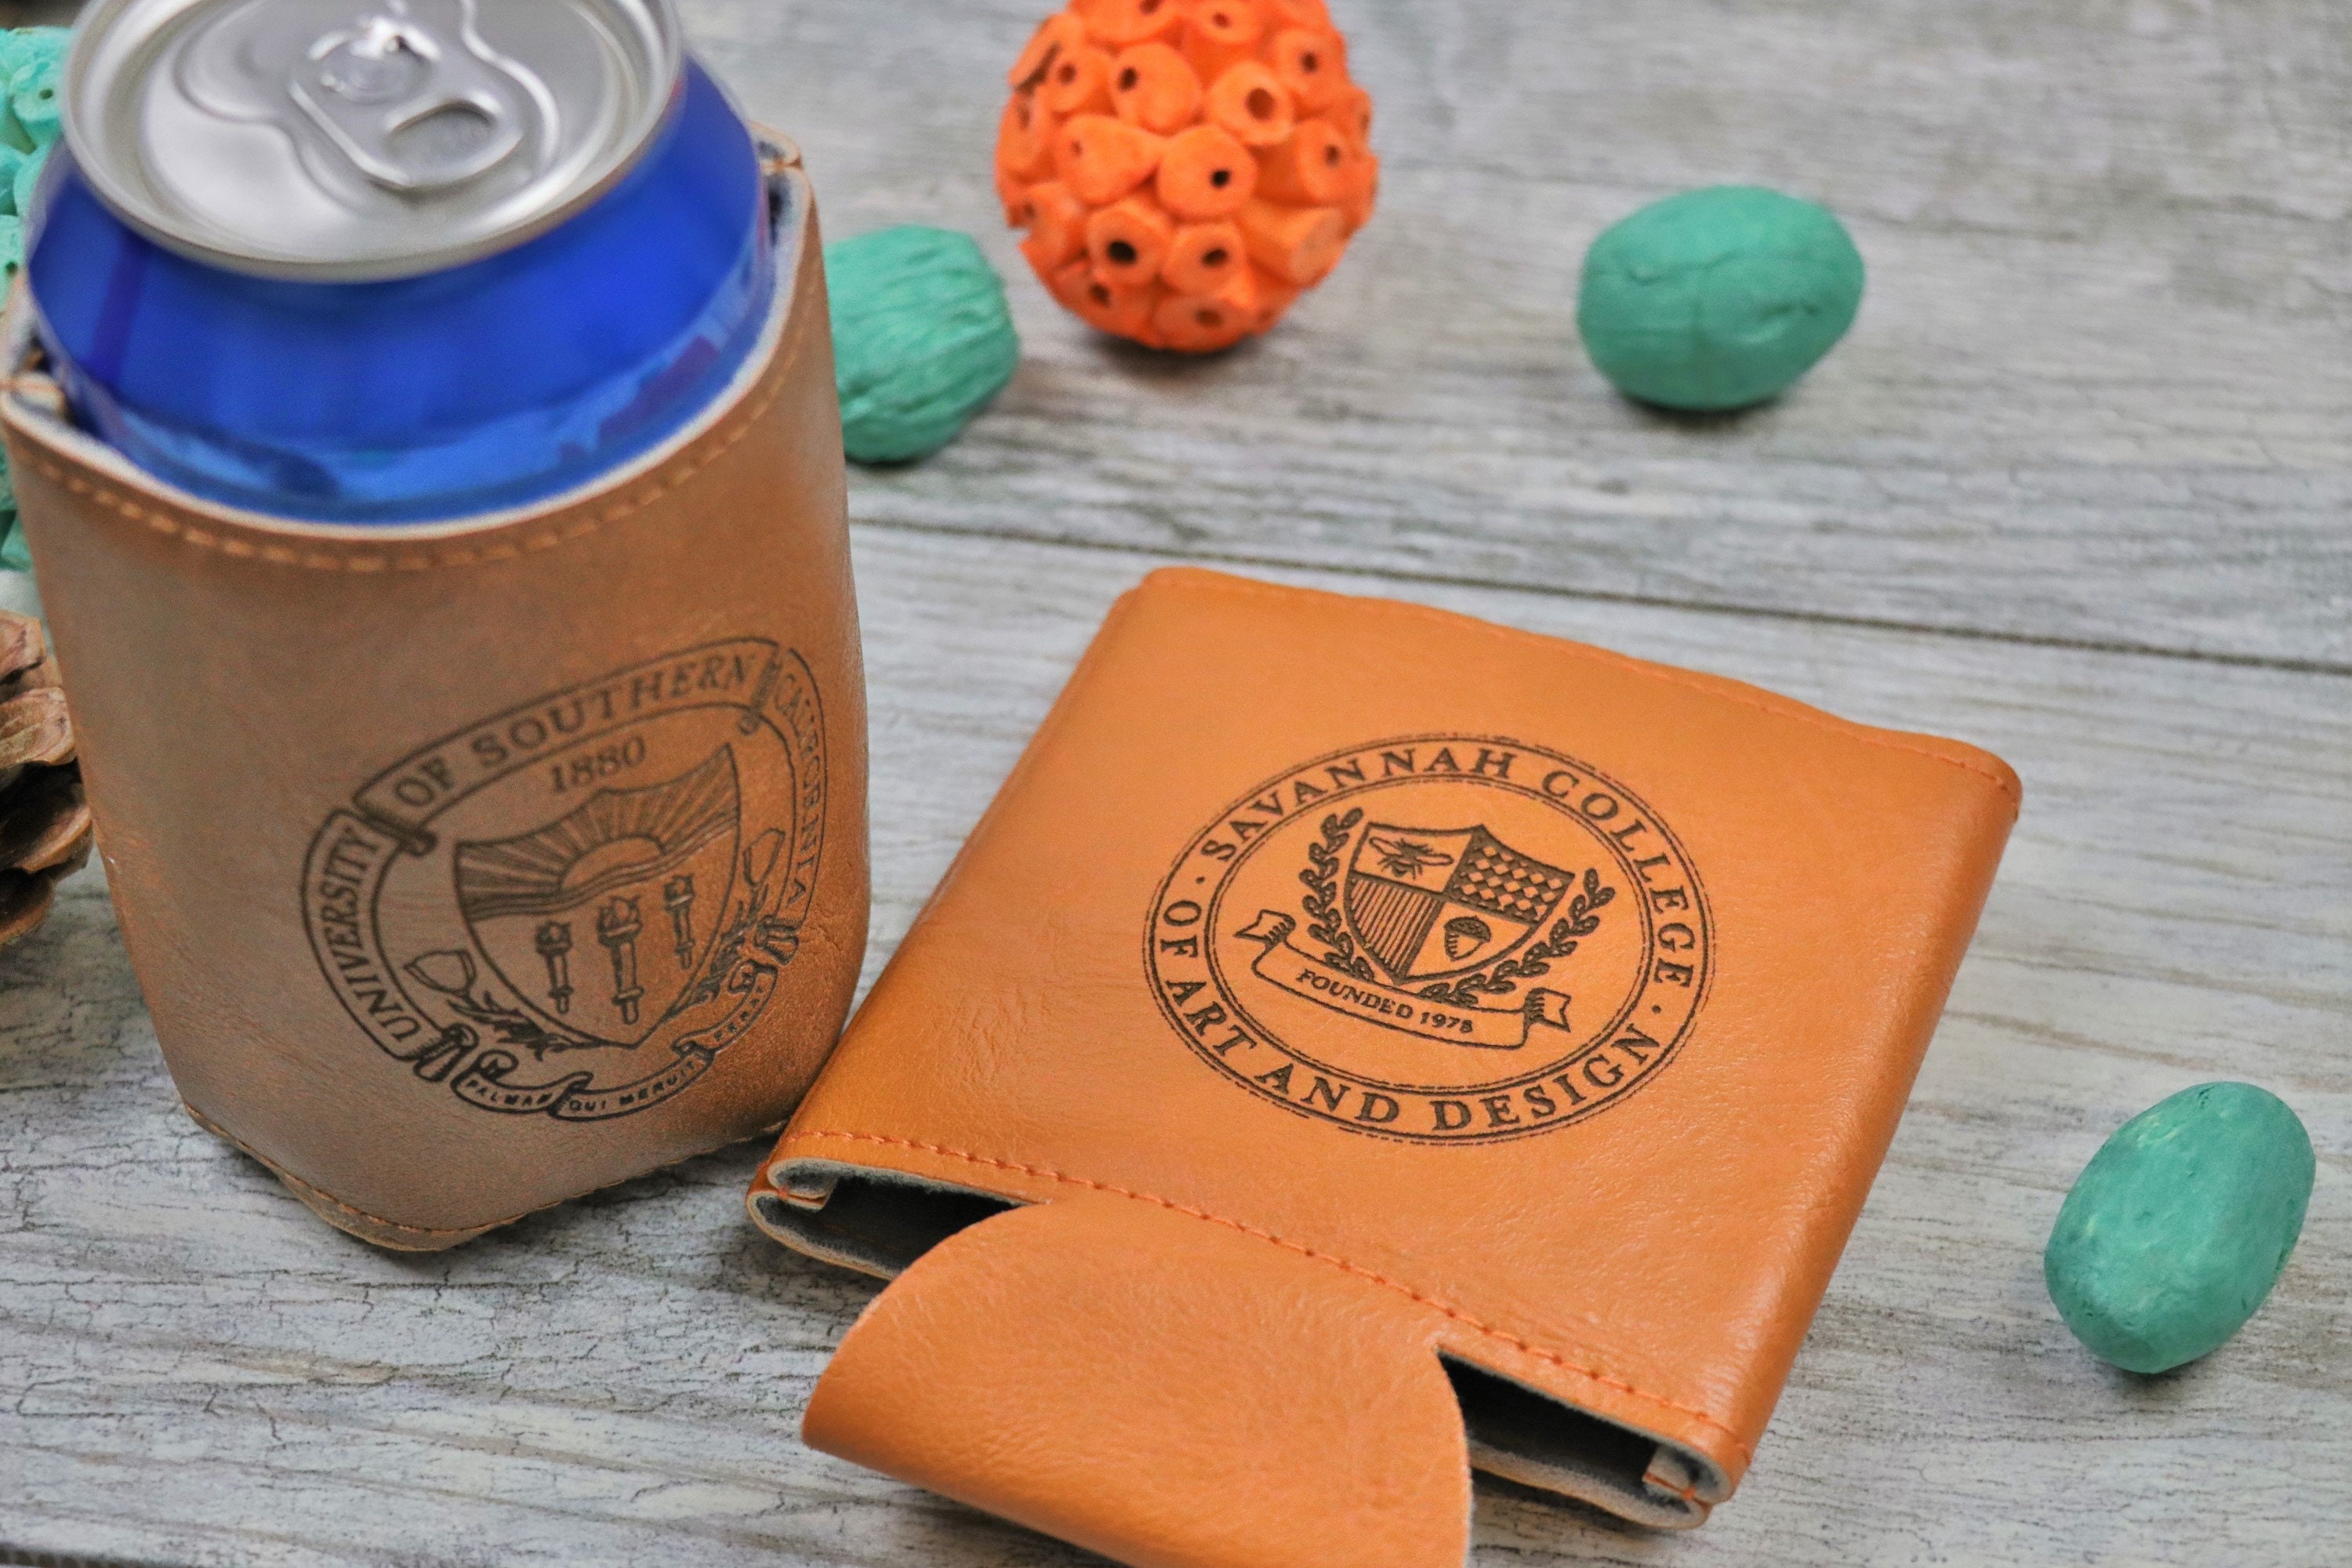 Leather Can Holders Bottoms up Can Cooler Beer Holder 